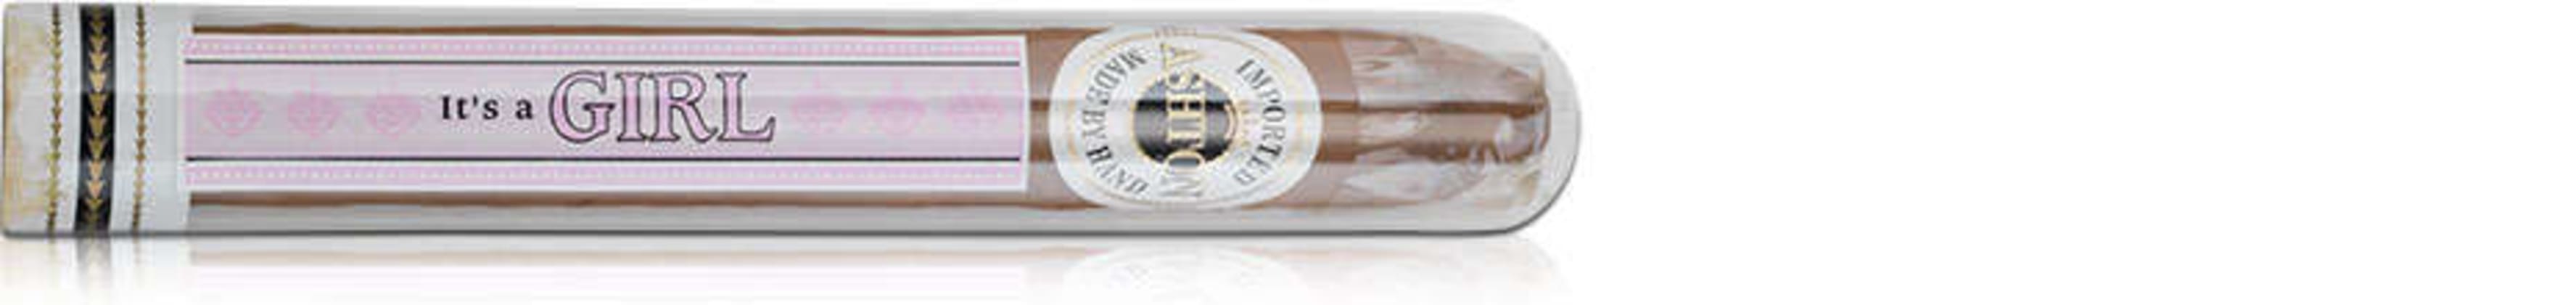 Ashton Classic New Baby Crystal Belicoso It's a Girl Single